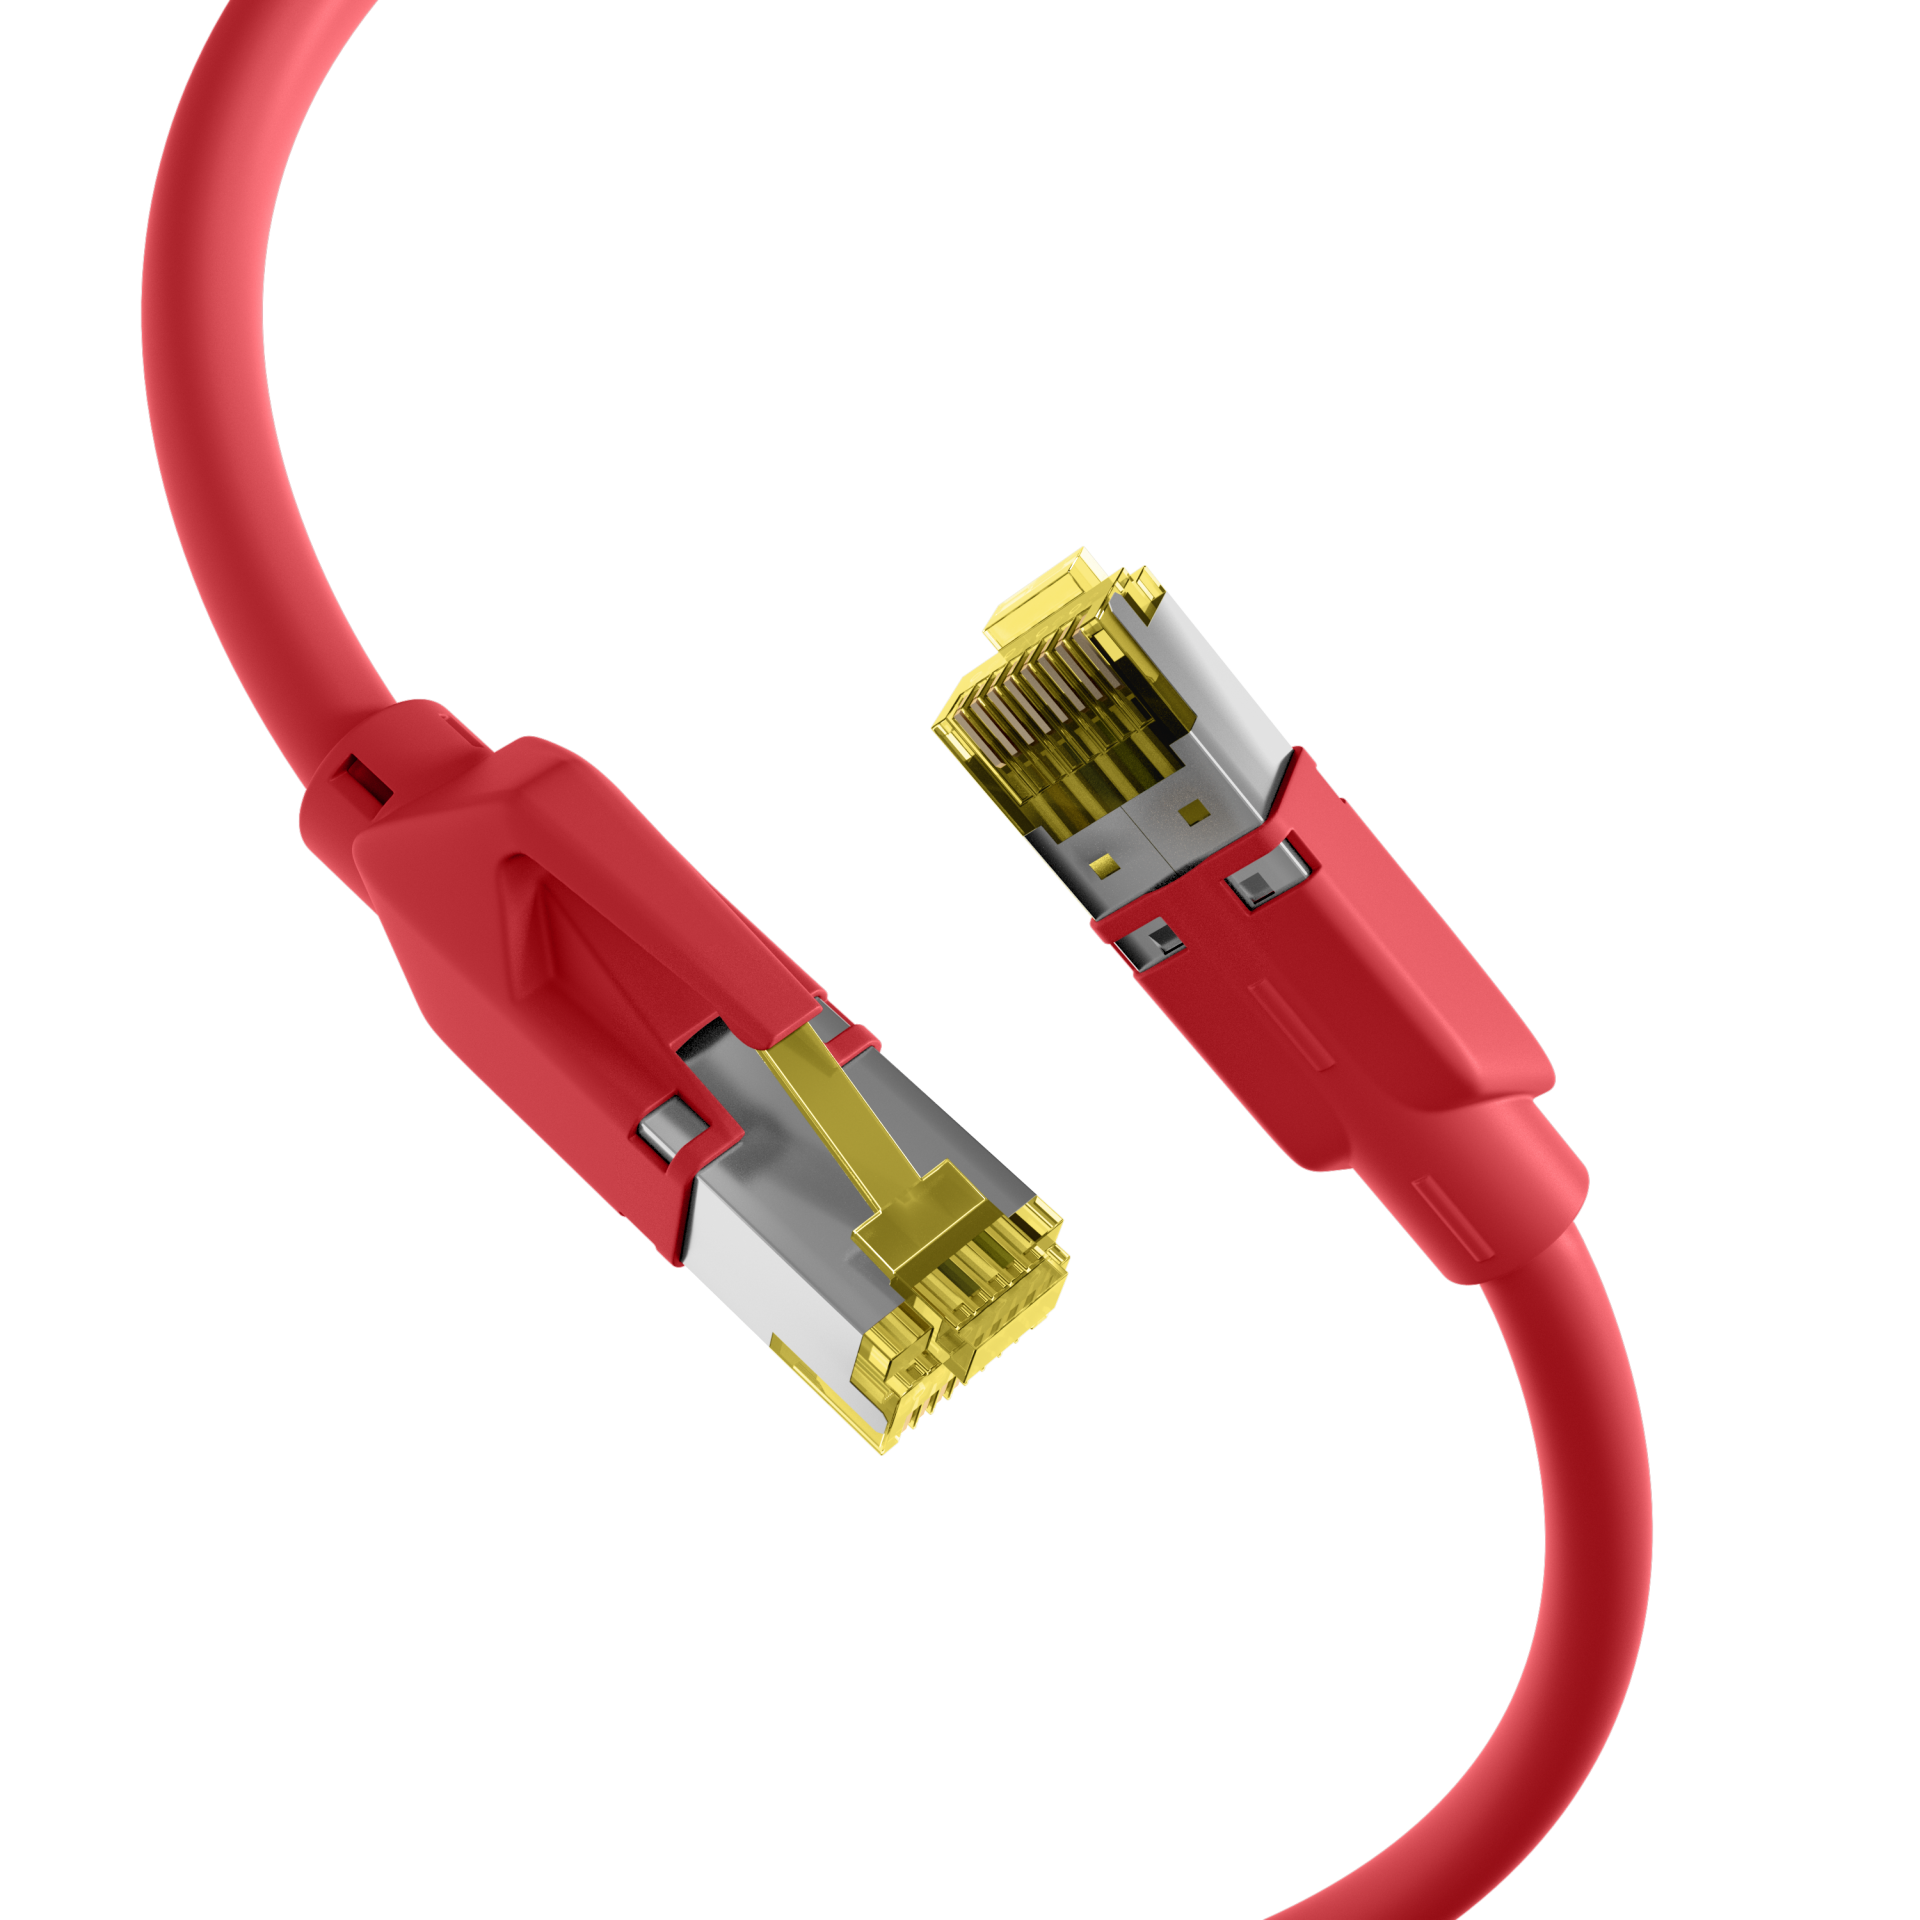 INFRALAN® RJ45 patch cord S/FTP, Cat.6A, TM31, UC900, 3m, red